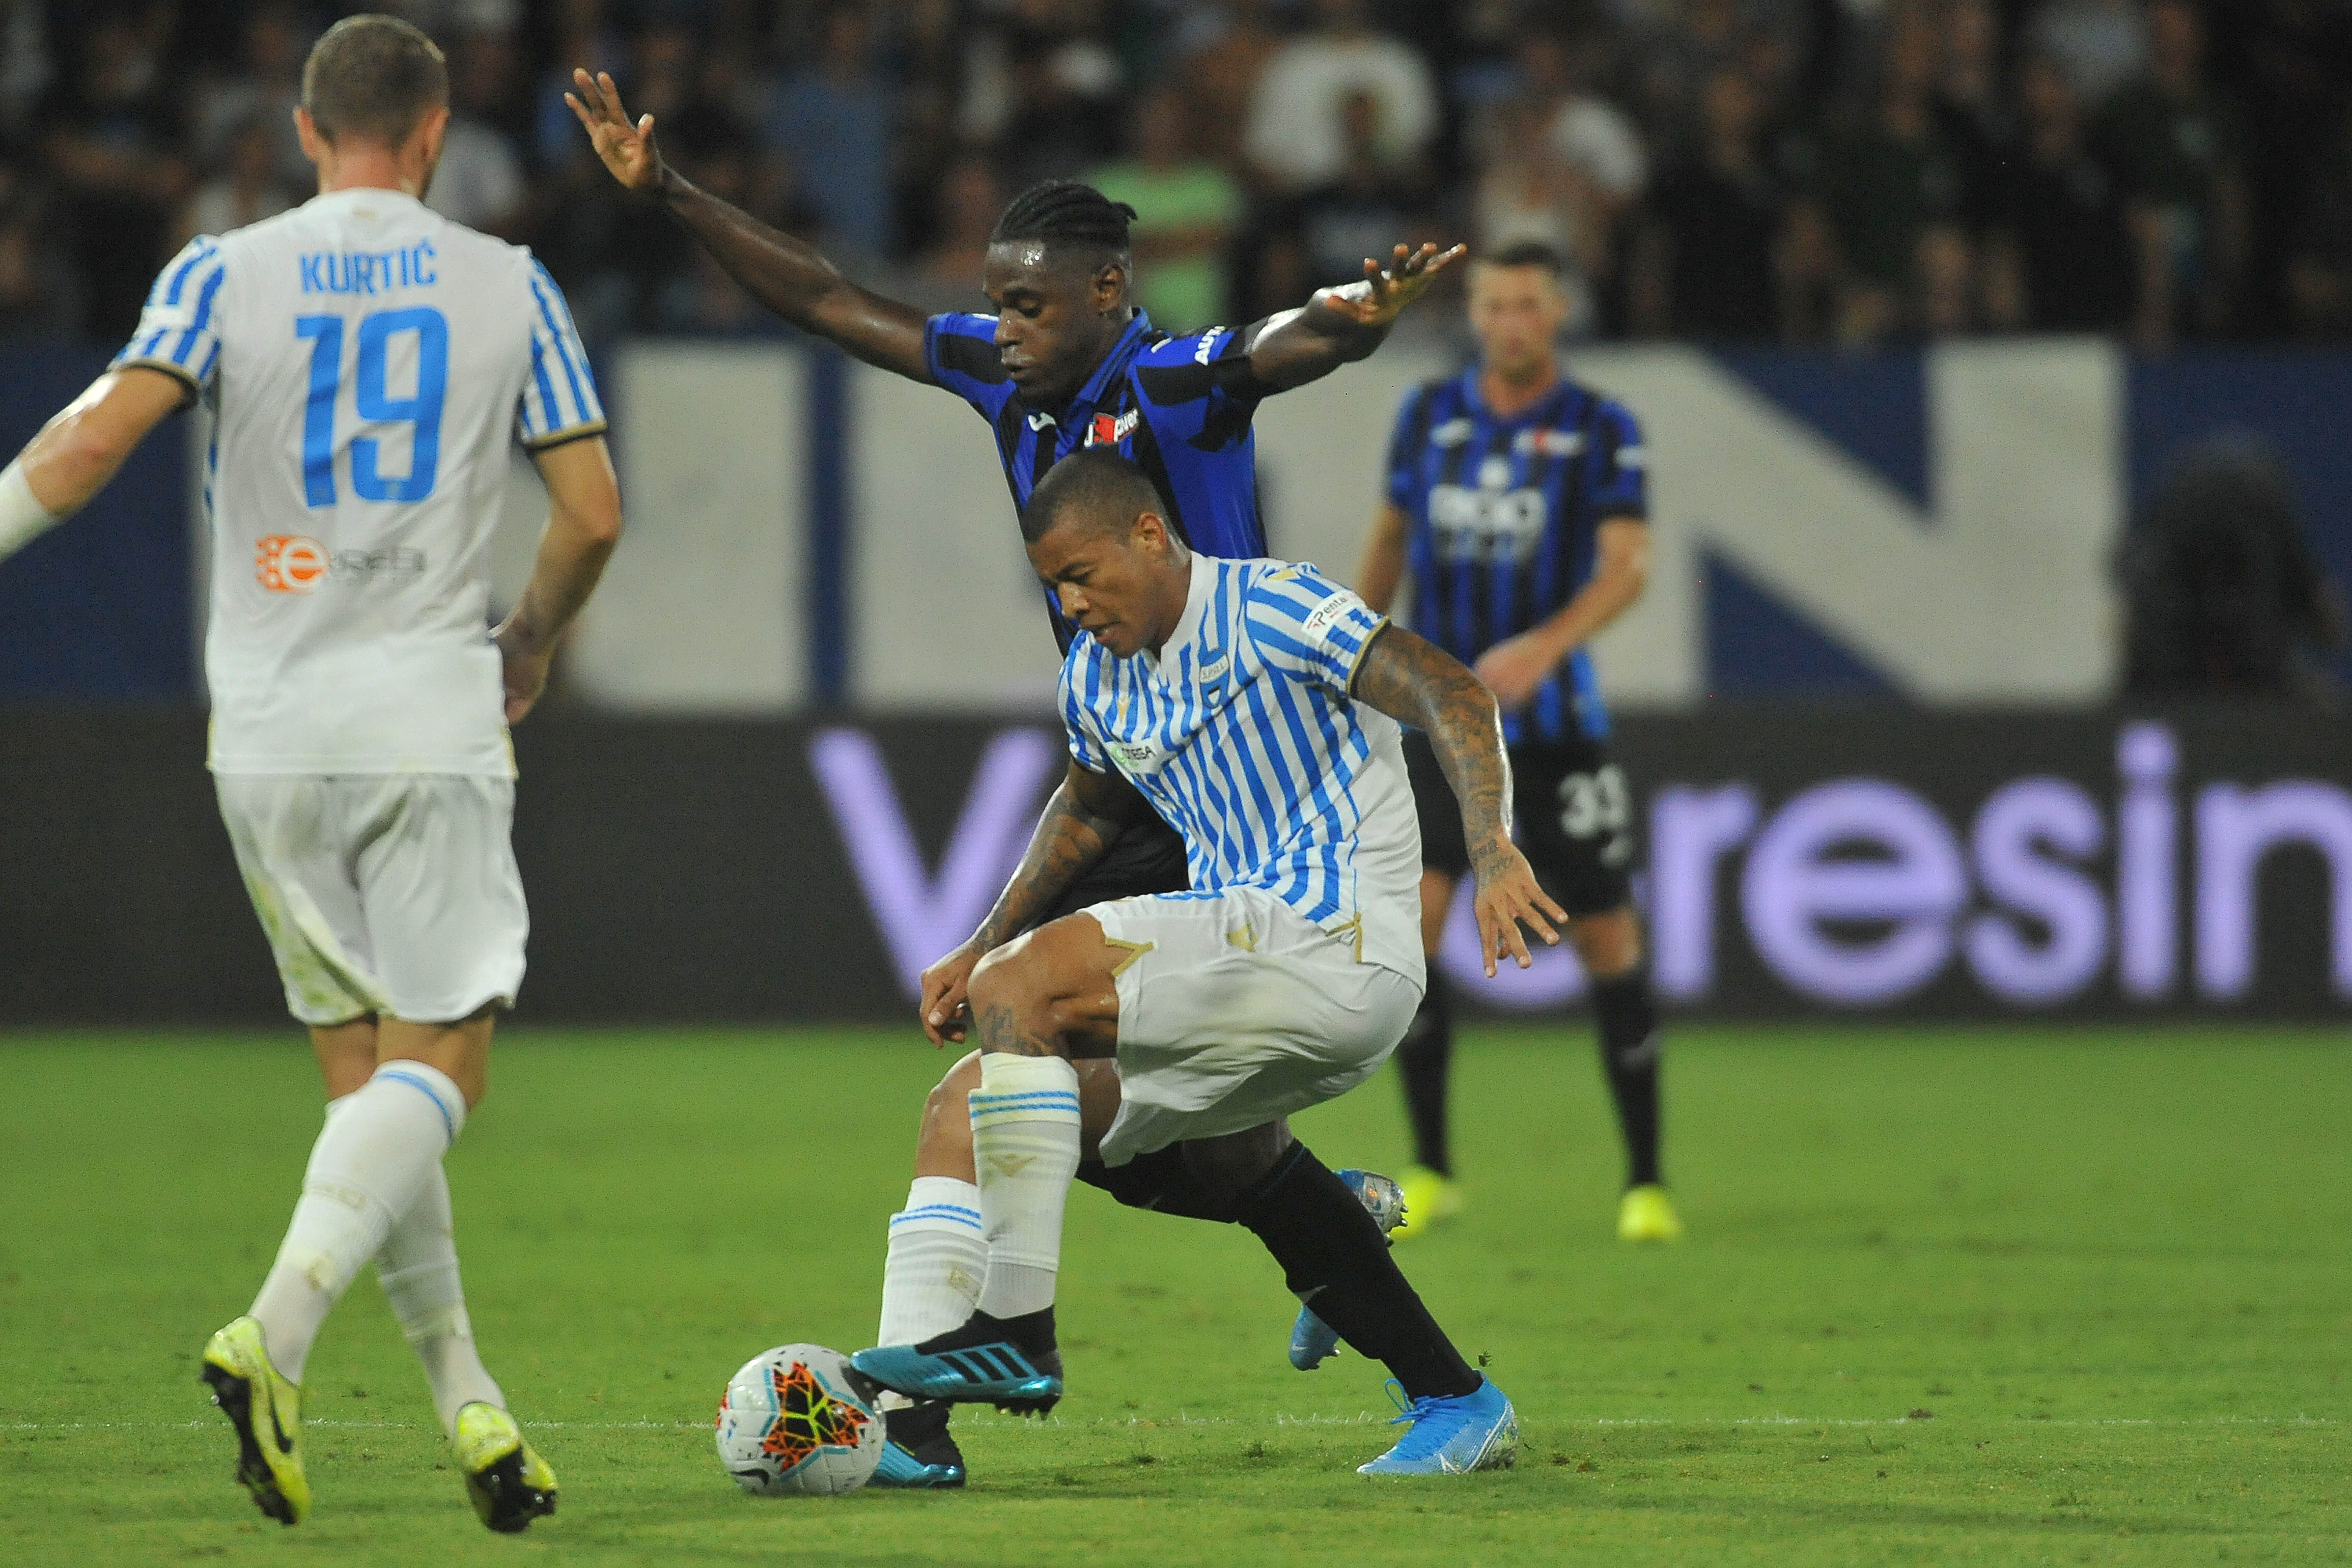 Another Brazilian aiming to be a regular fixture in Serie A. (Picture Courtesy - AFP/Getty Images)